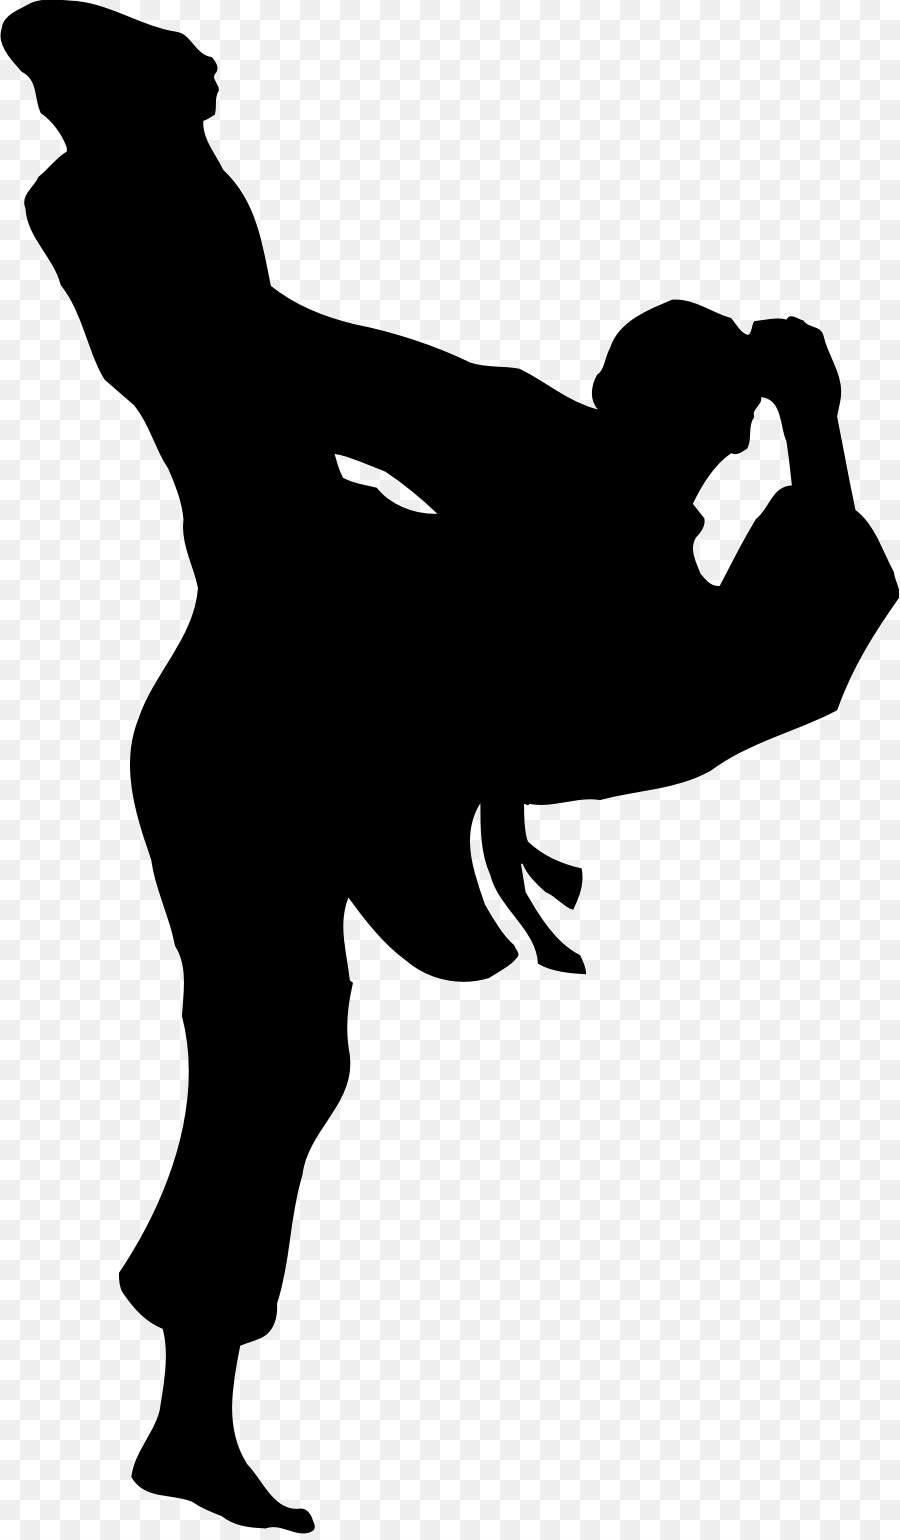 Male Silhouette Character White Clip art - karate png download - 899*1534 - Free Transparent Male png Download.